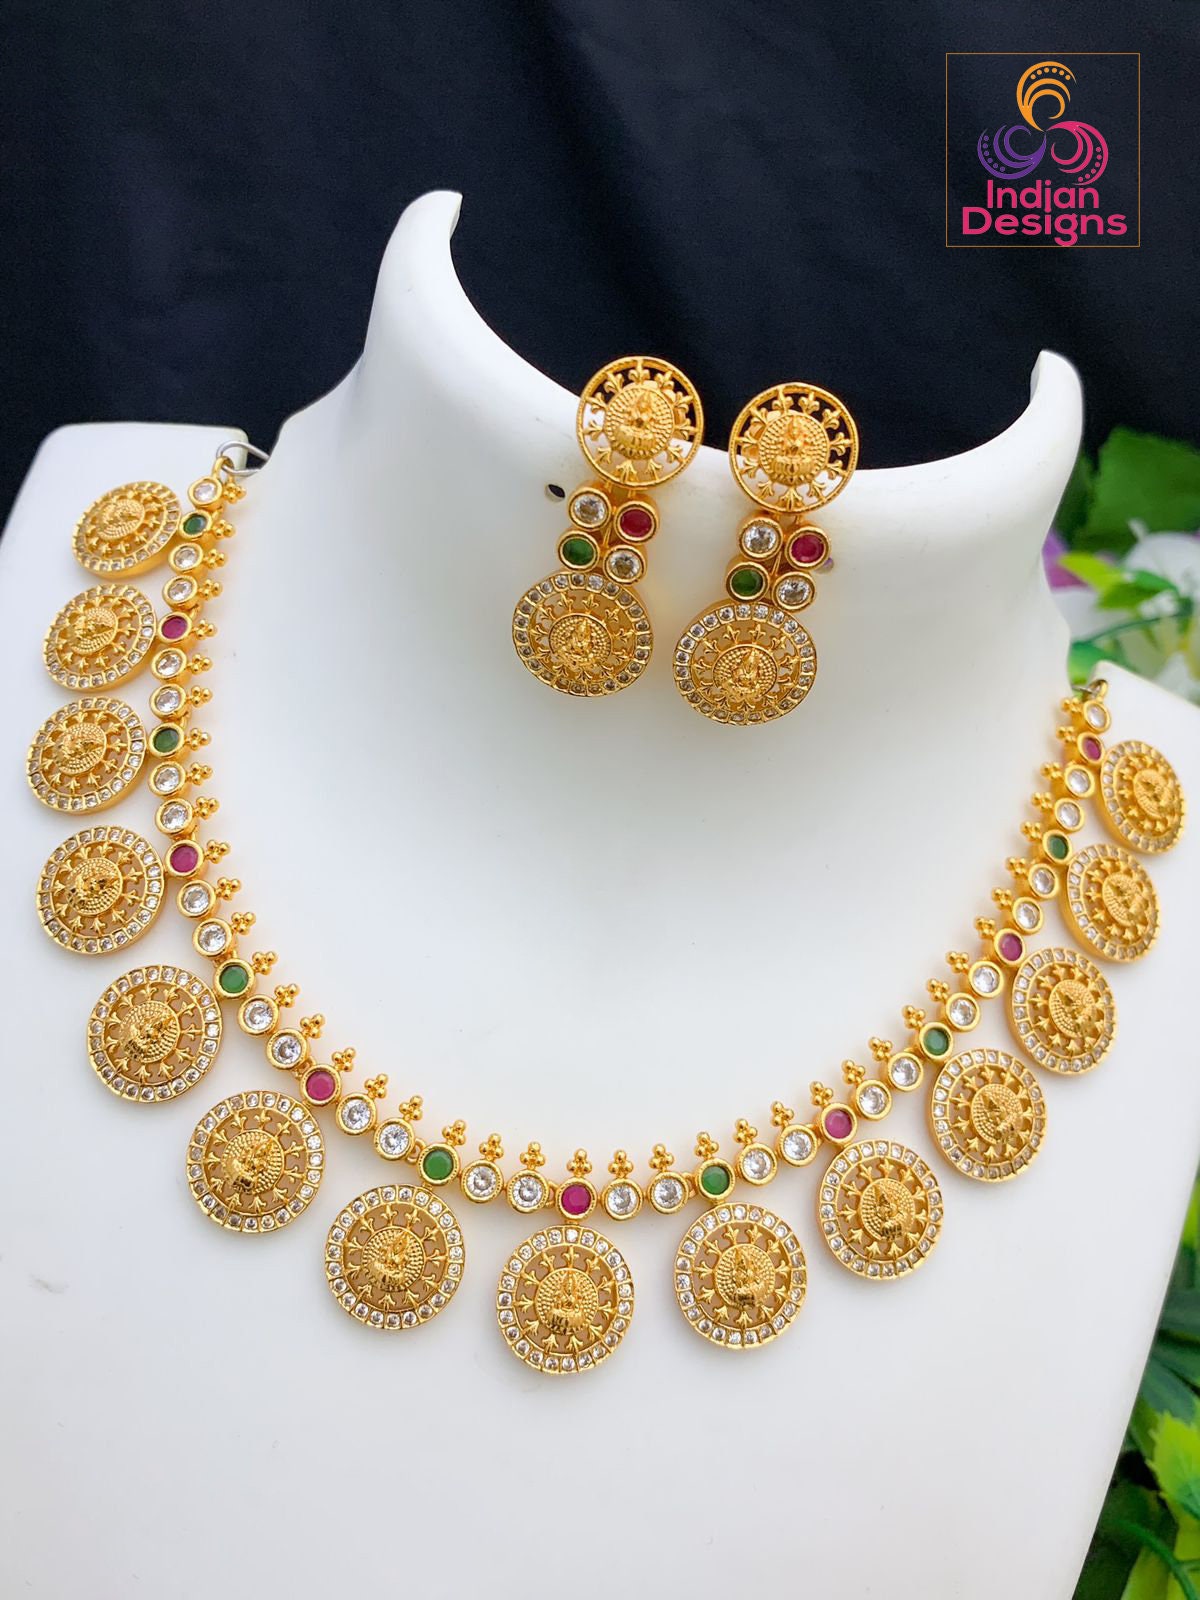 Indian Gold Jewelry Temple Jewellery Necklace Set/ Gold Mat 